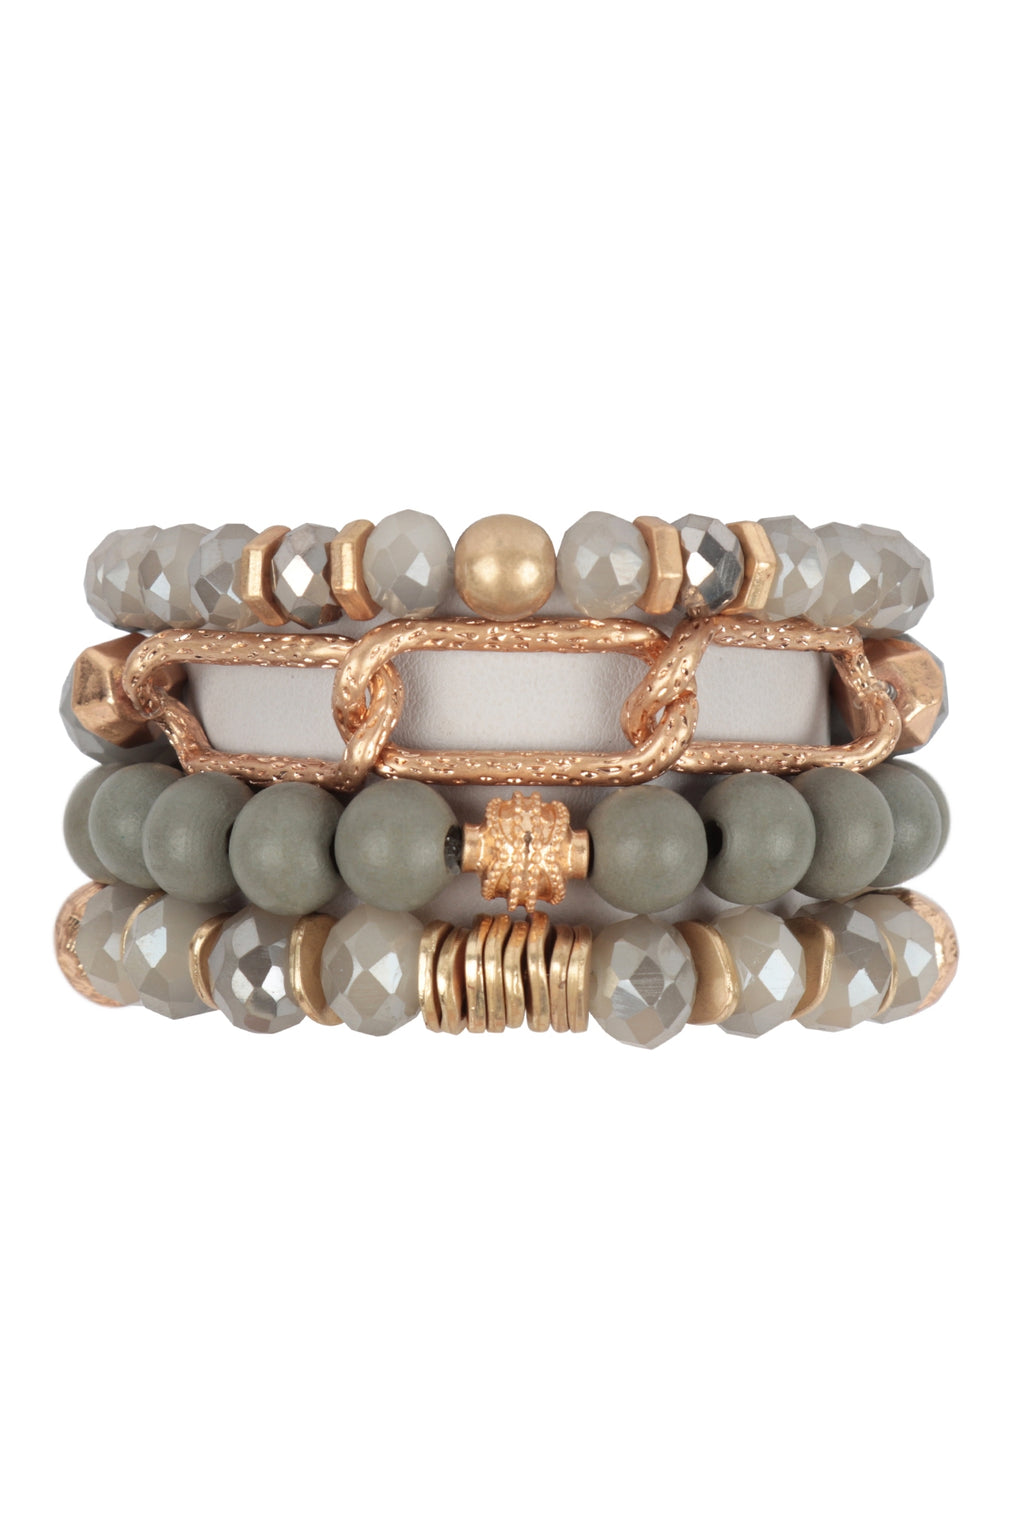 Charm Boho Wood, Rondelle Beads and Chain Bracelet Gray - Pack of 6